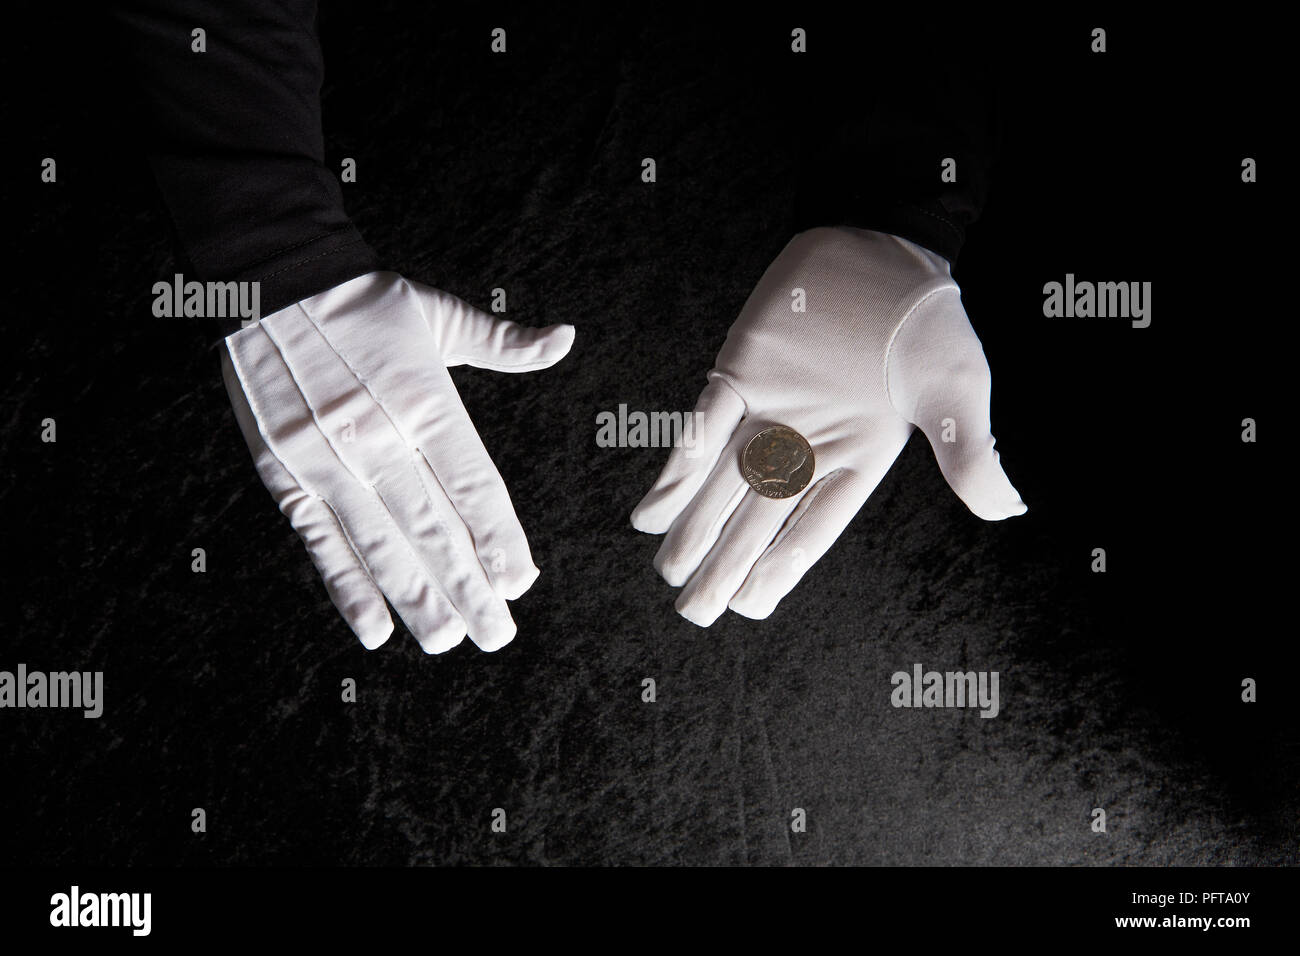 Gloved hands holding coin Stock Photo